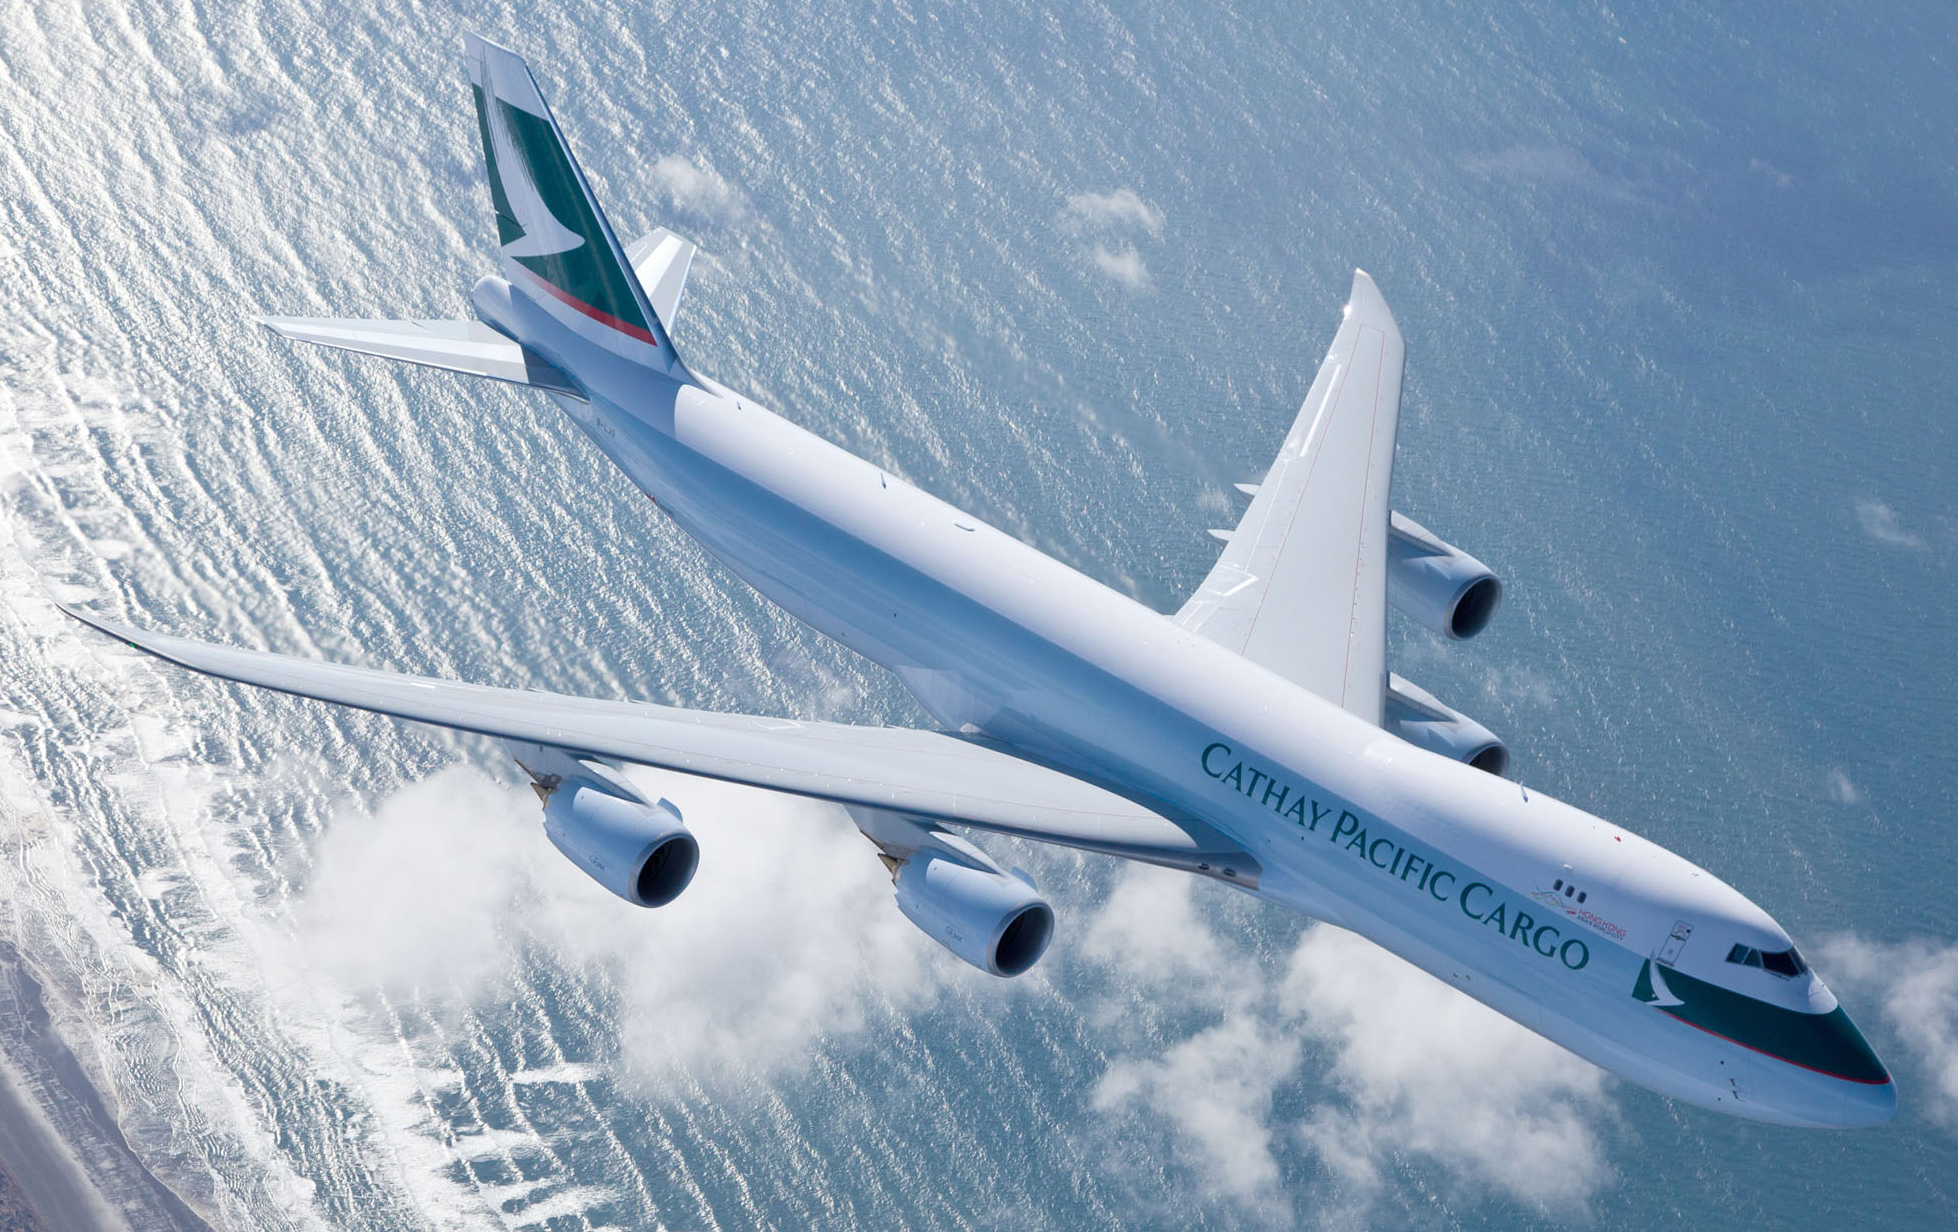 Photo/Cathay Pacific